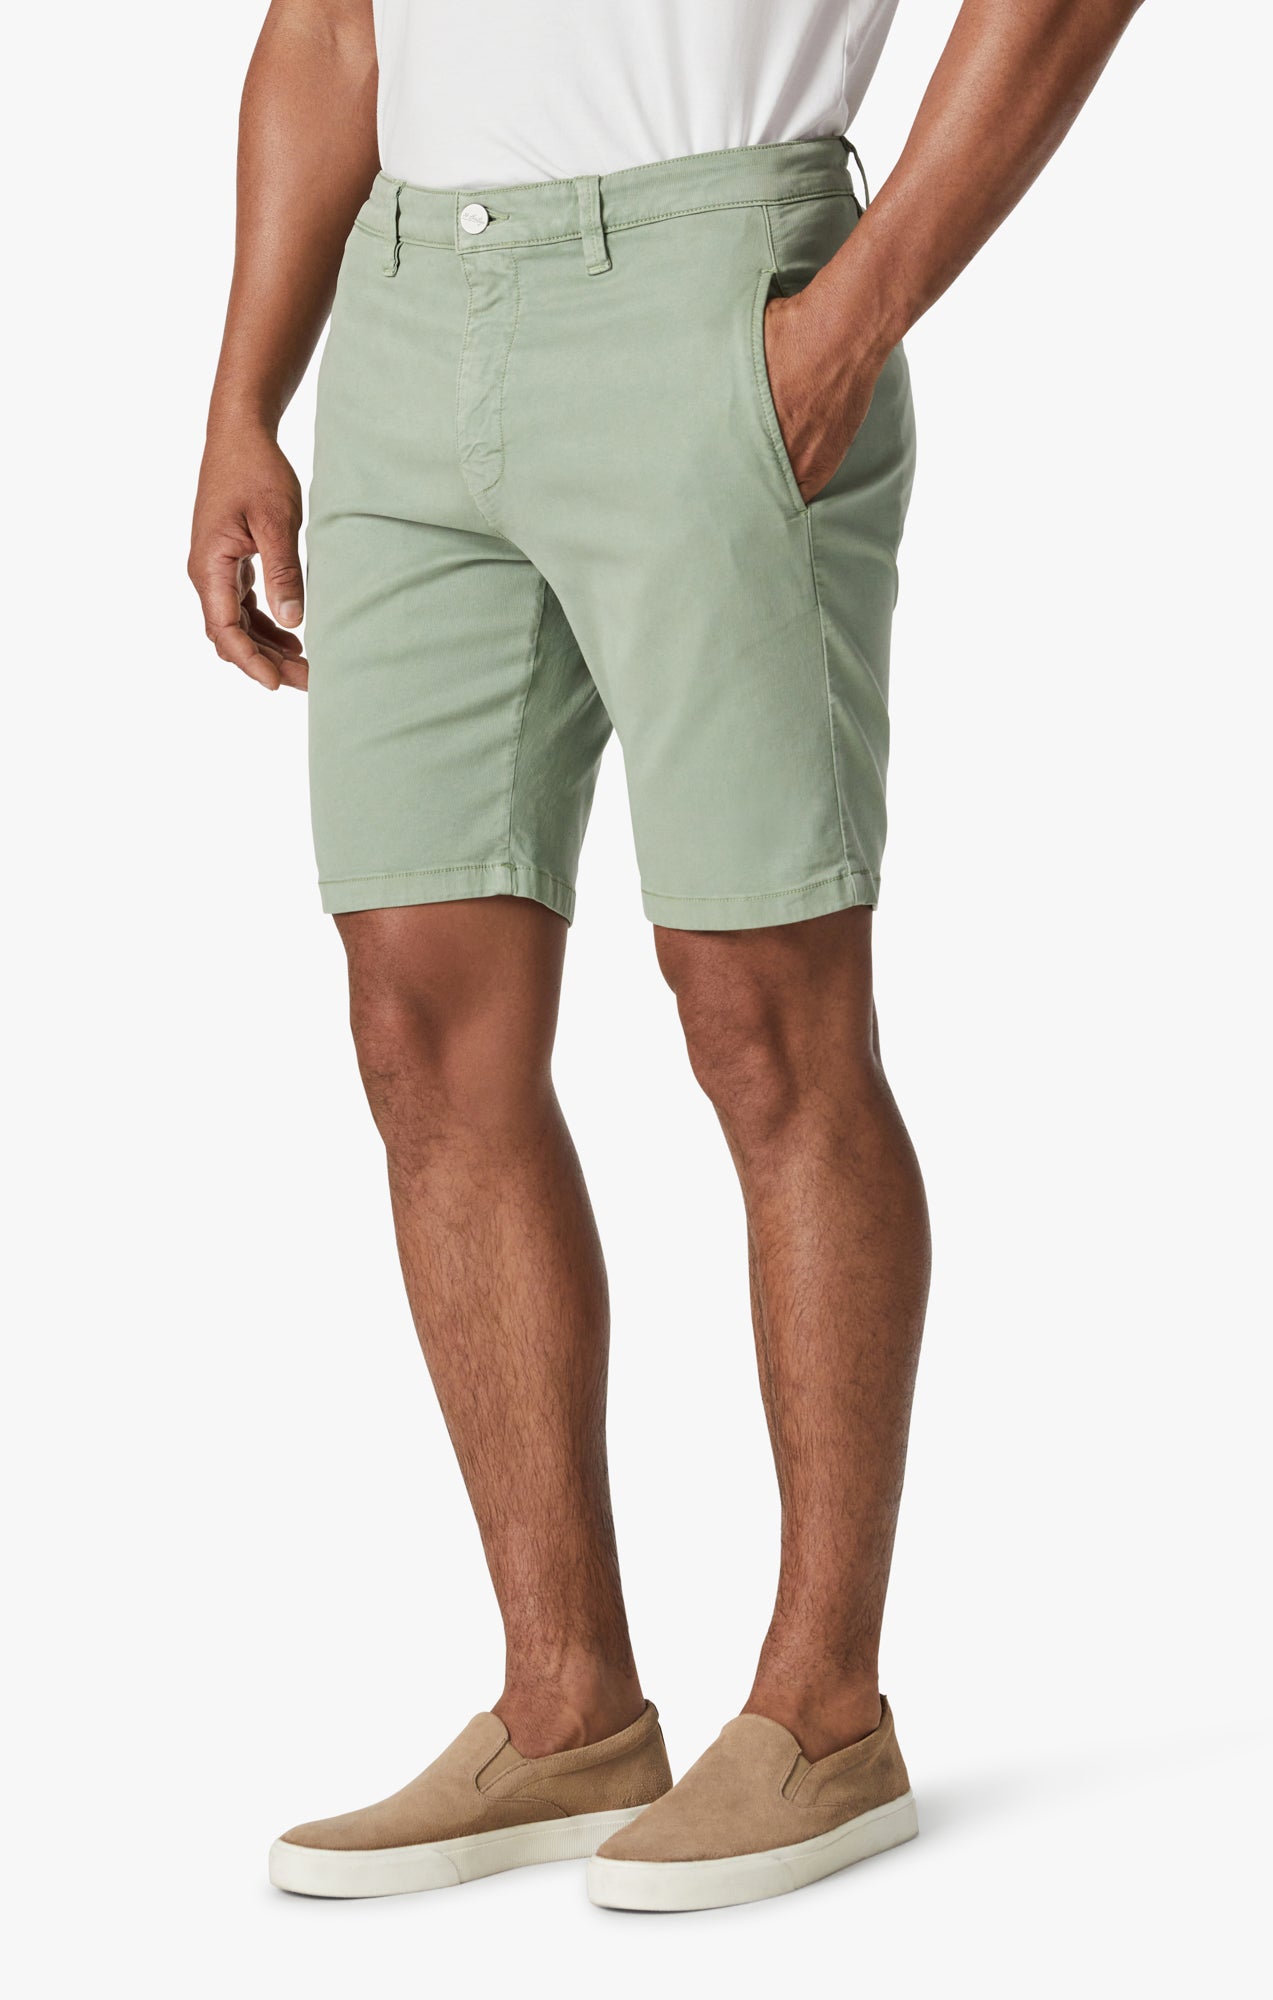 Nevada Shorts in Green Soft Touch Image 4